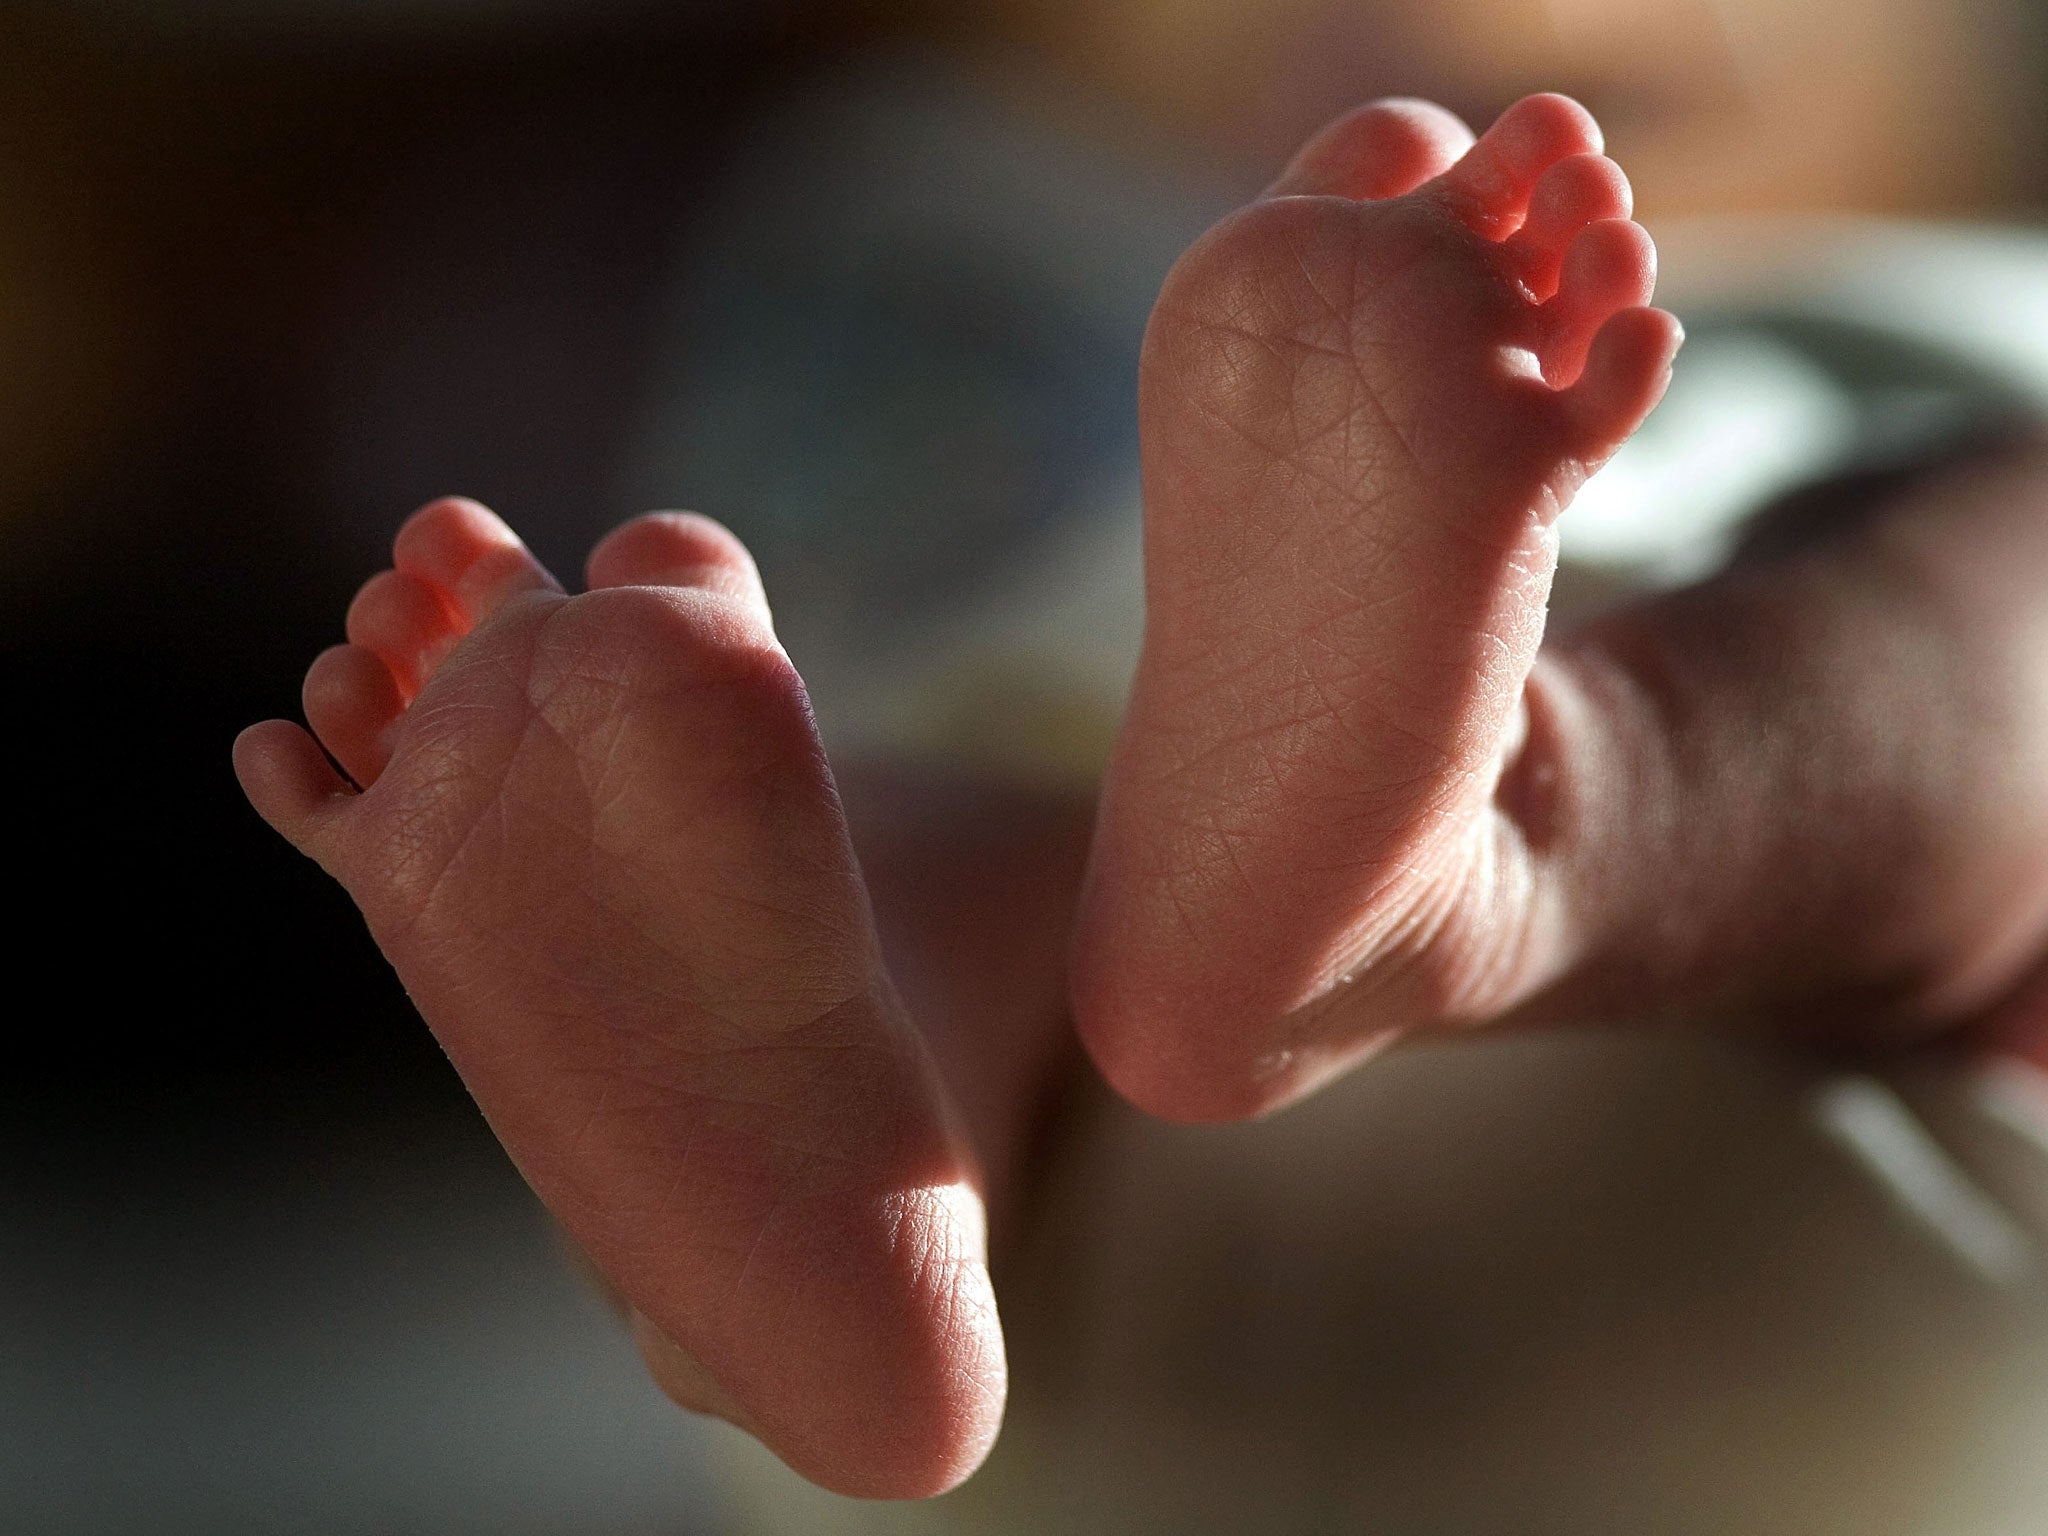 CMV affects about 1,000 babies every year